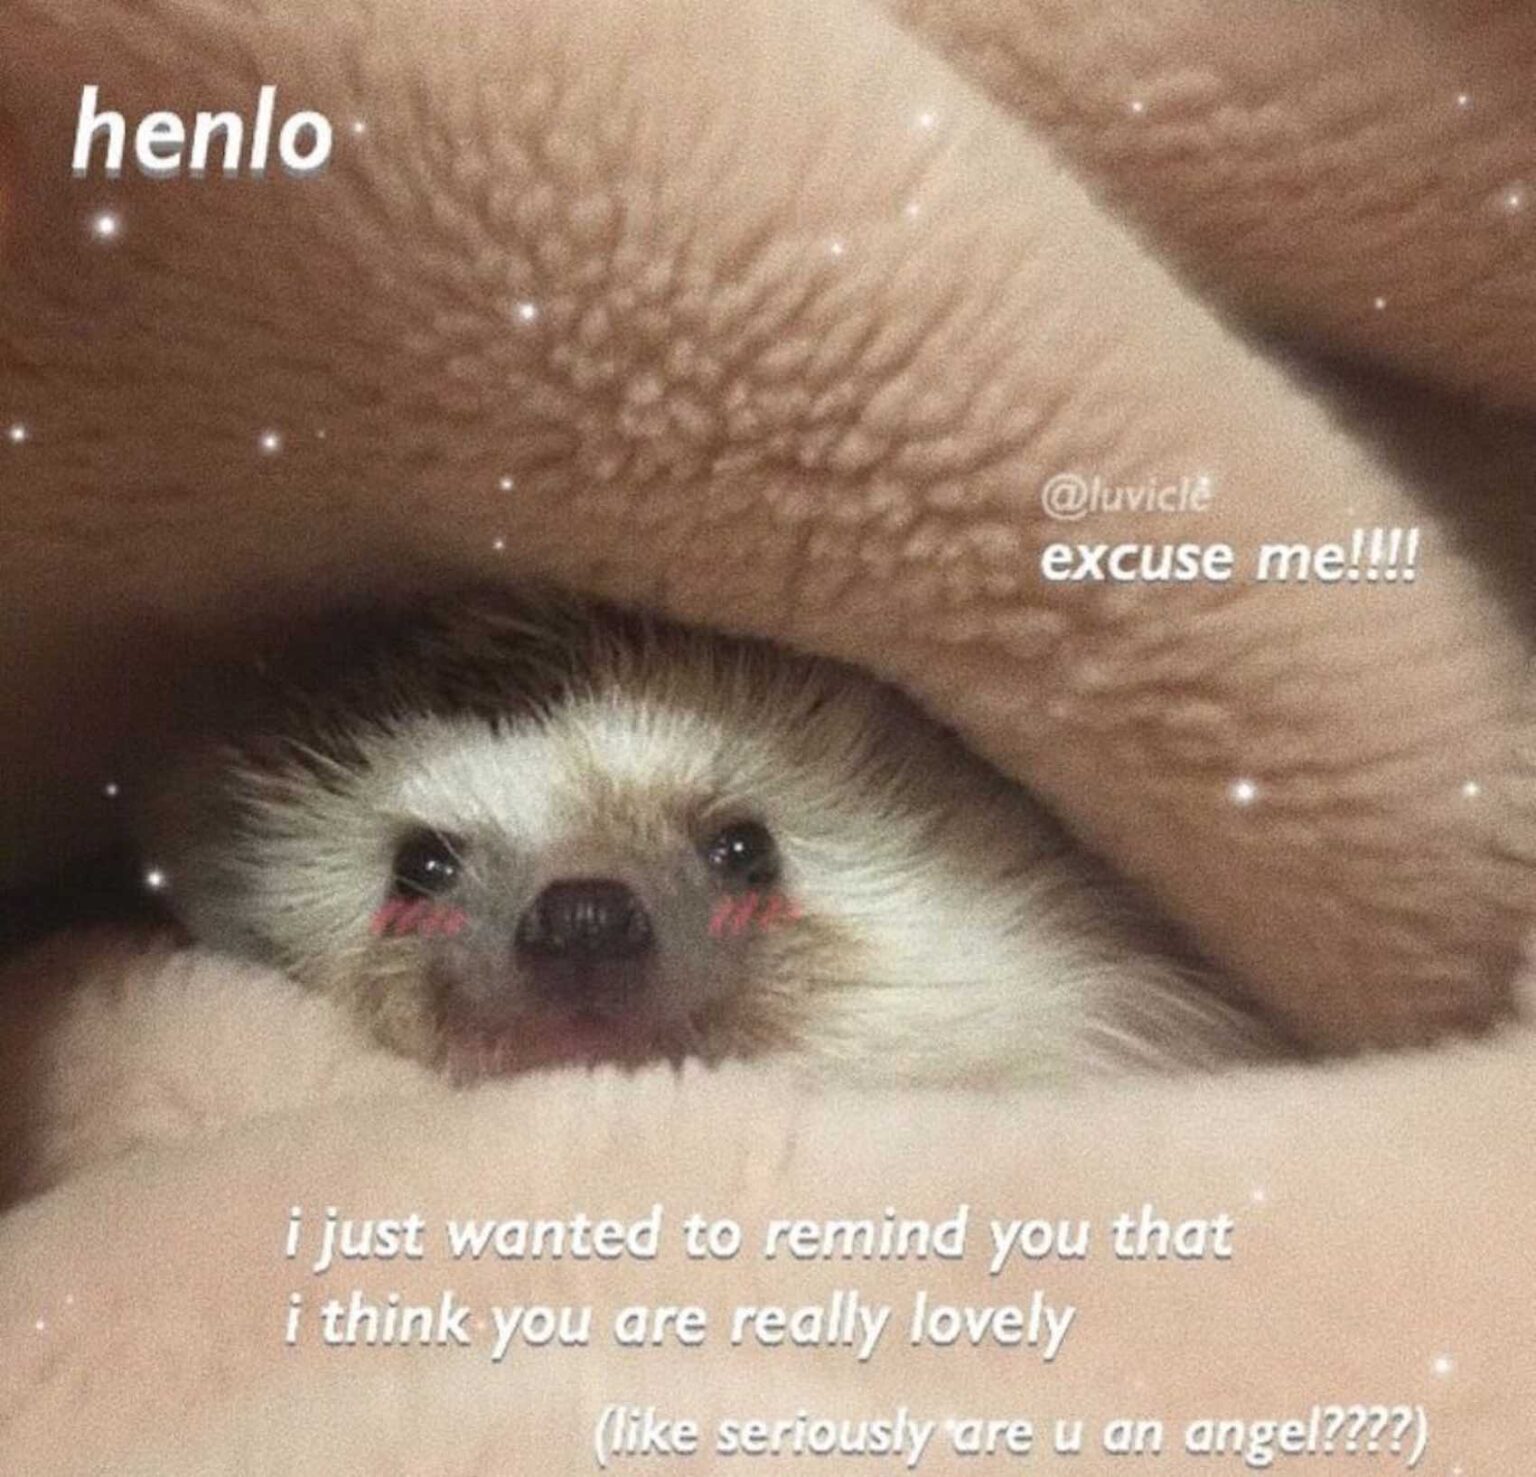 Flirty memes are a great way to subtly (and humorously) let your partner know you care about them. Send these to your significant other.